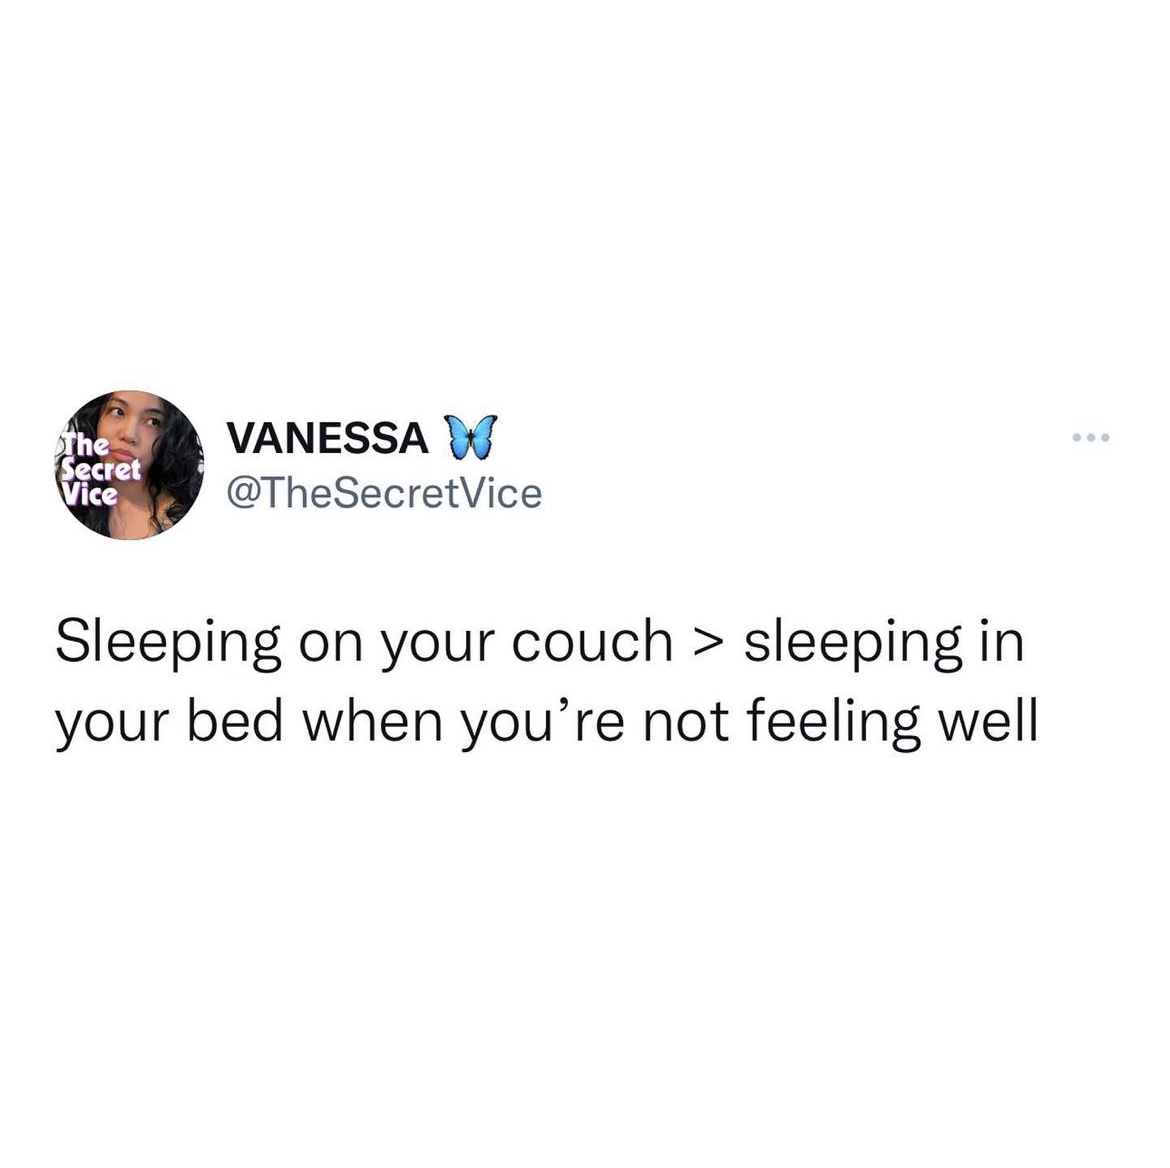 Savage and hilarious tweets - Photograph - The Secret Vice Vanessa Sleeping on your couch > sleeping in your bed when you're not feeling well